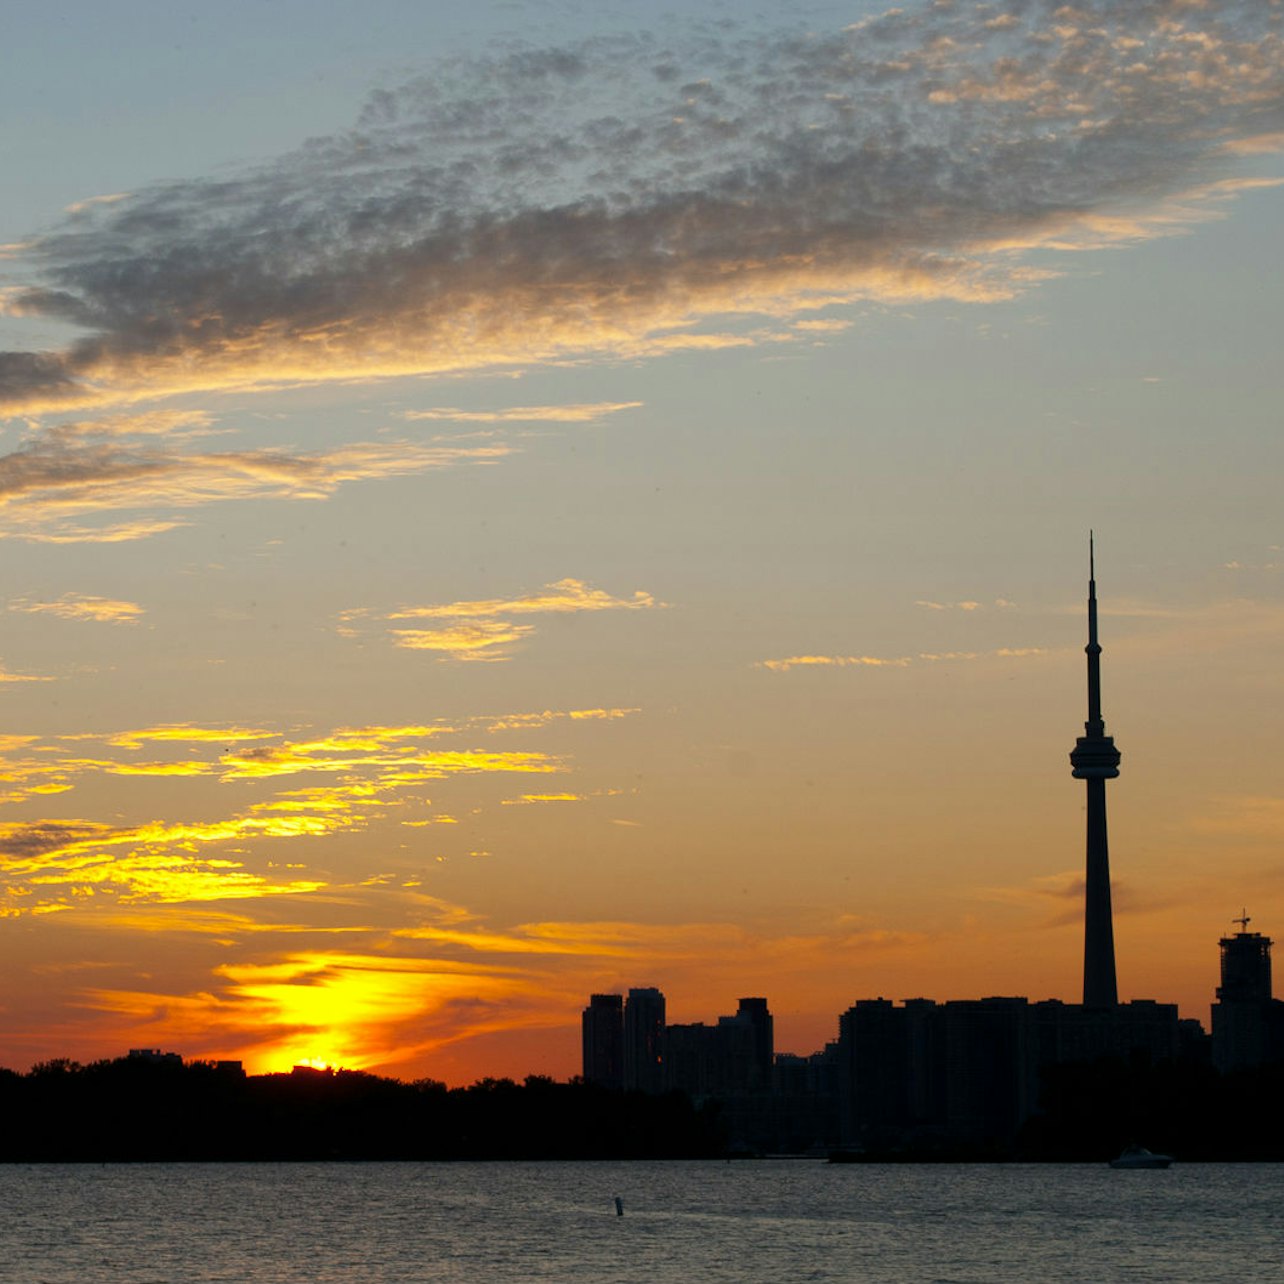 Toronto Harbour Cruise - Accommodations in Toronto